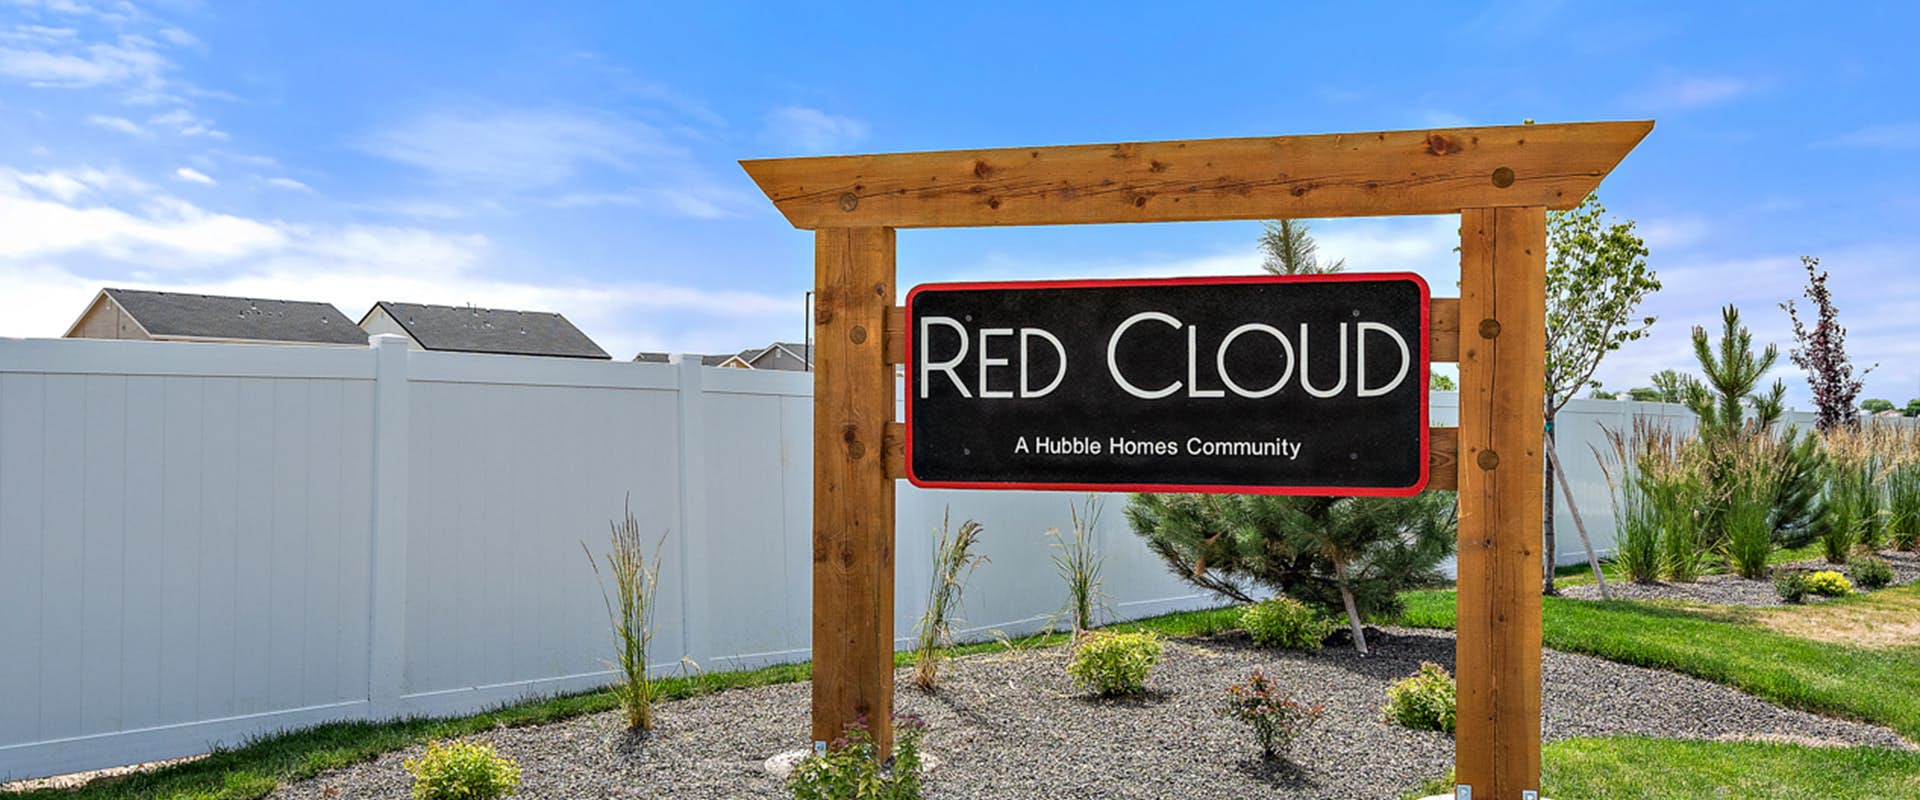 Red Cloud Hubble Homes New Homes Boise.jpg